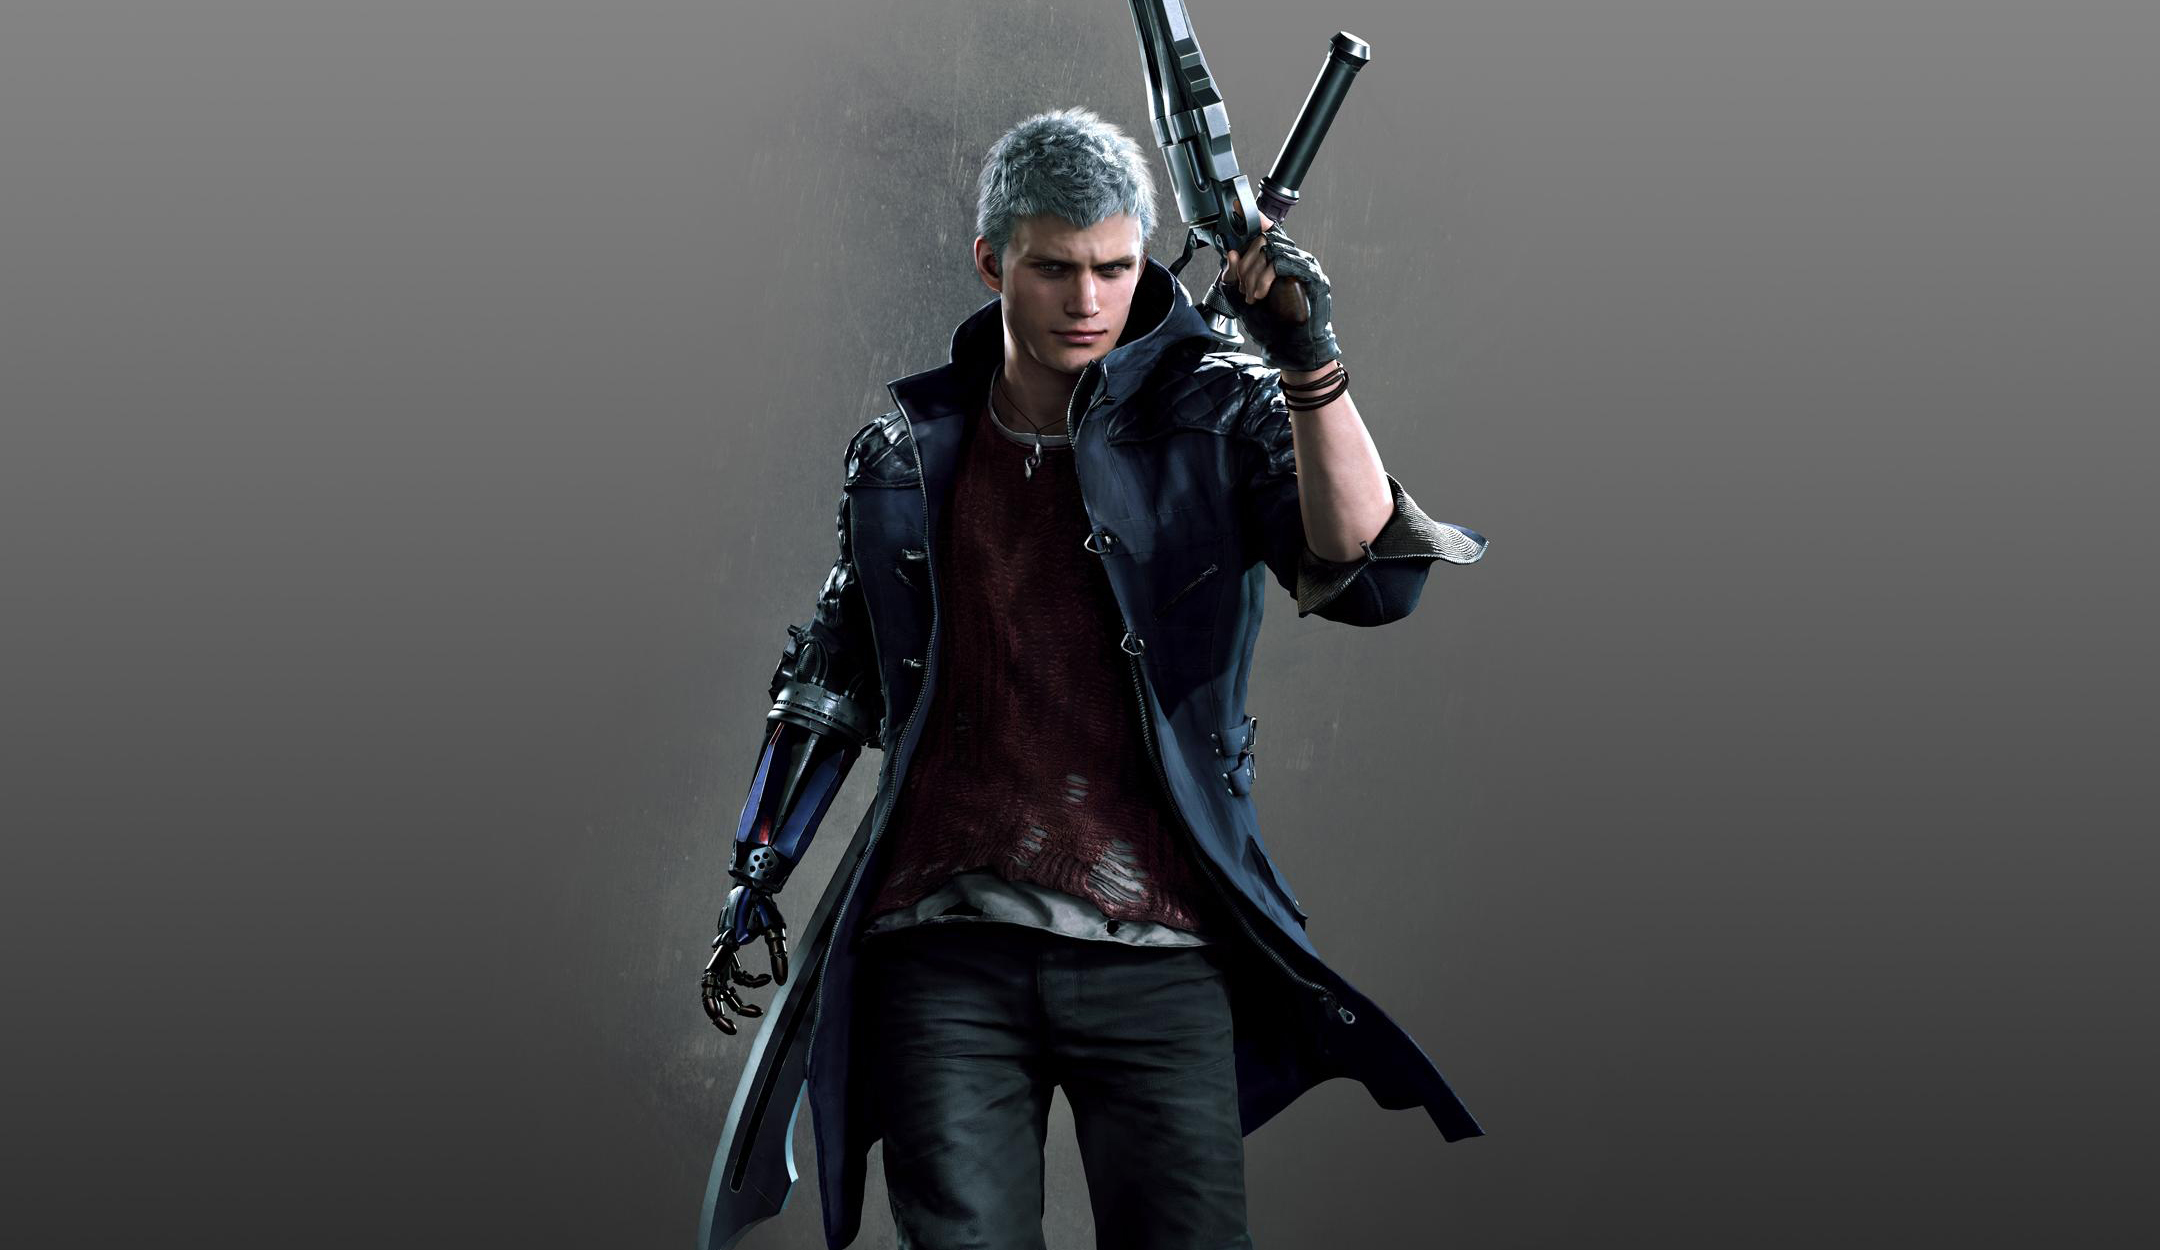 download devil may cry 5